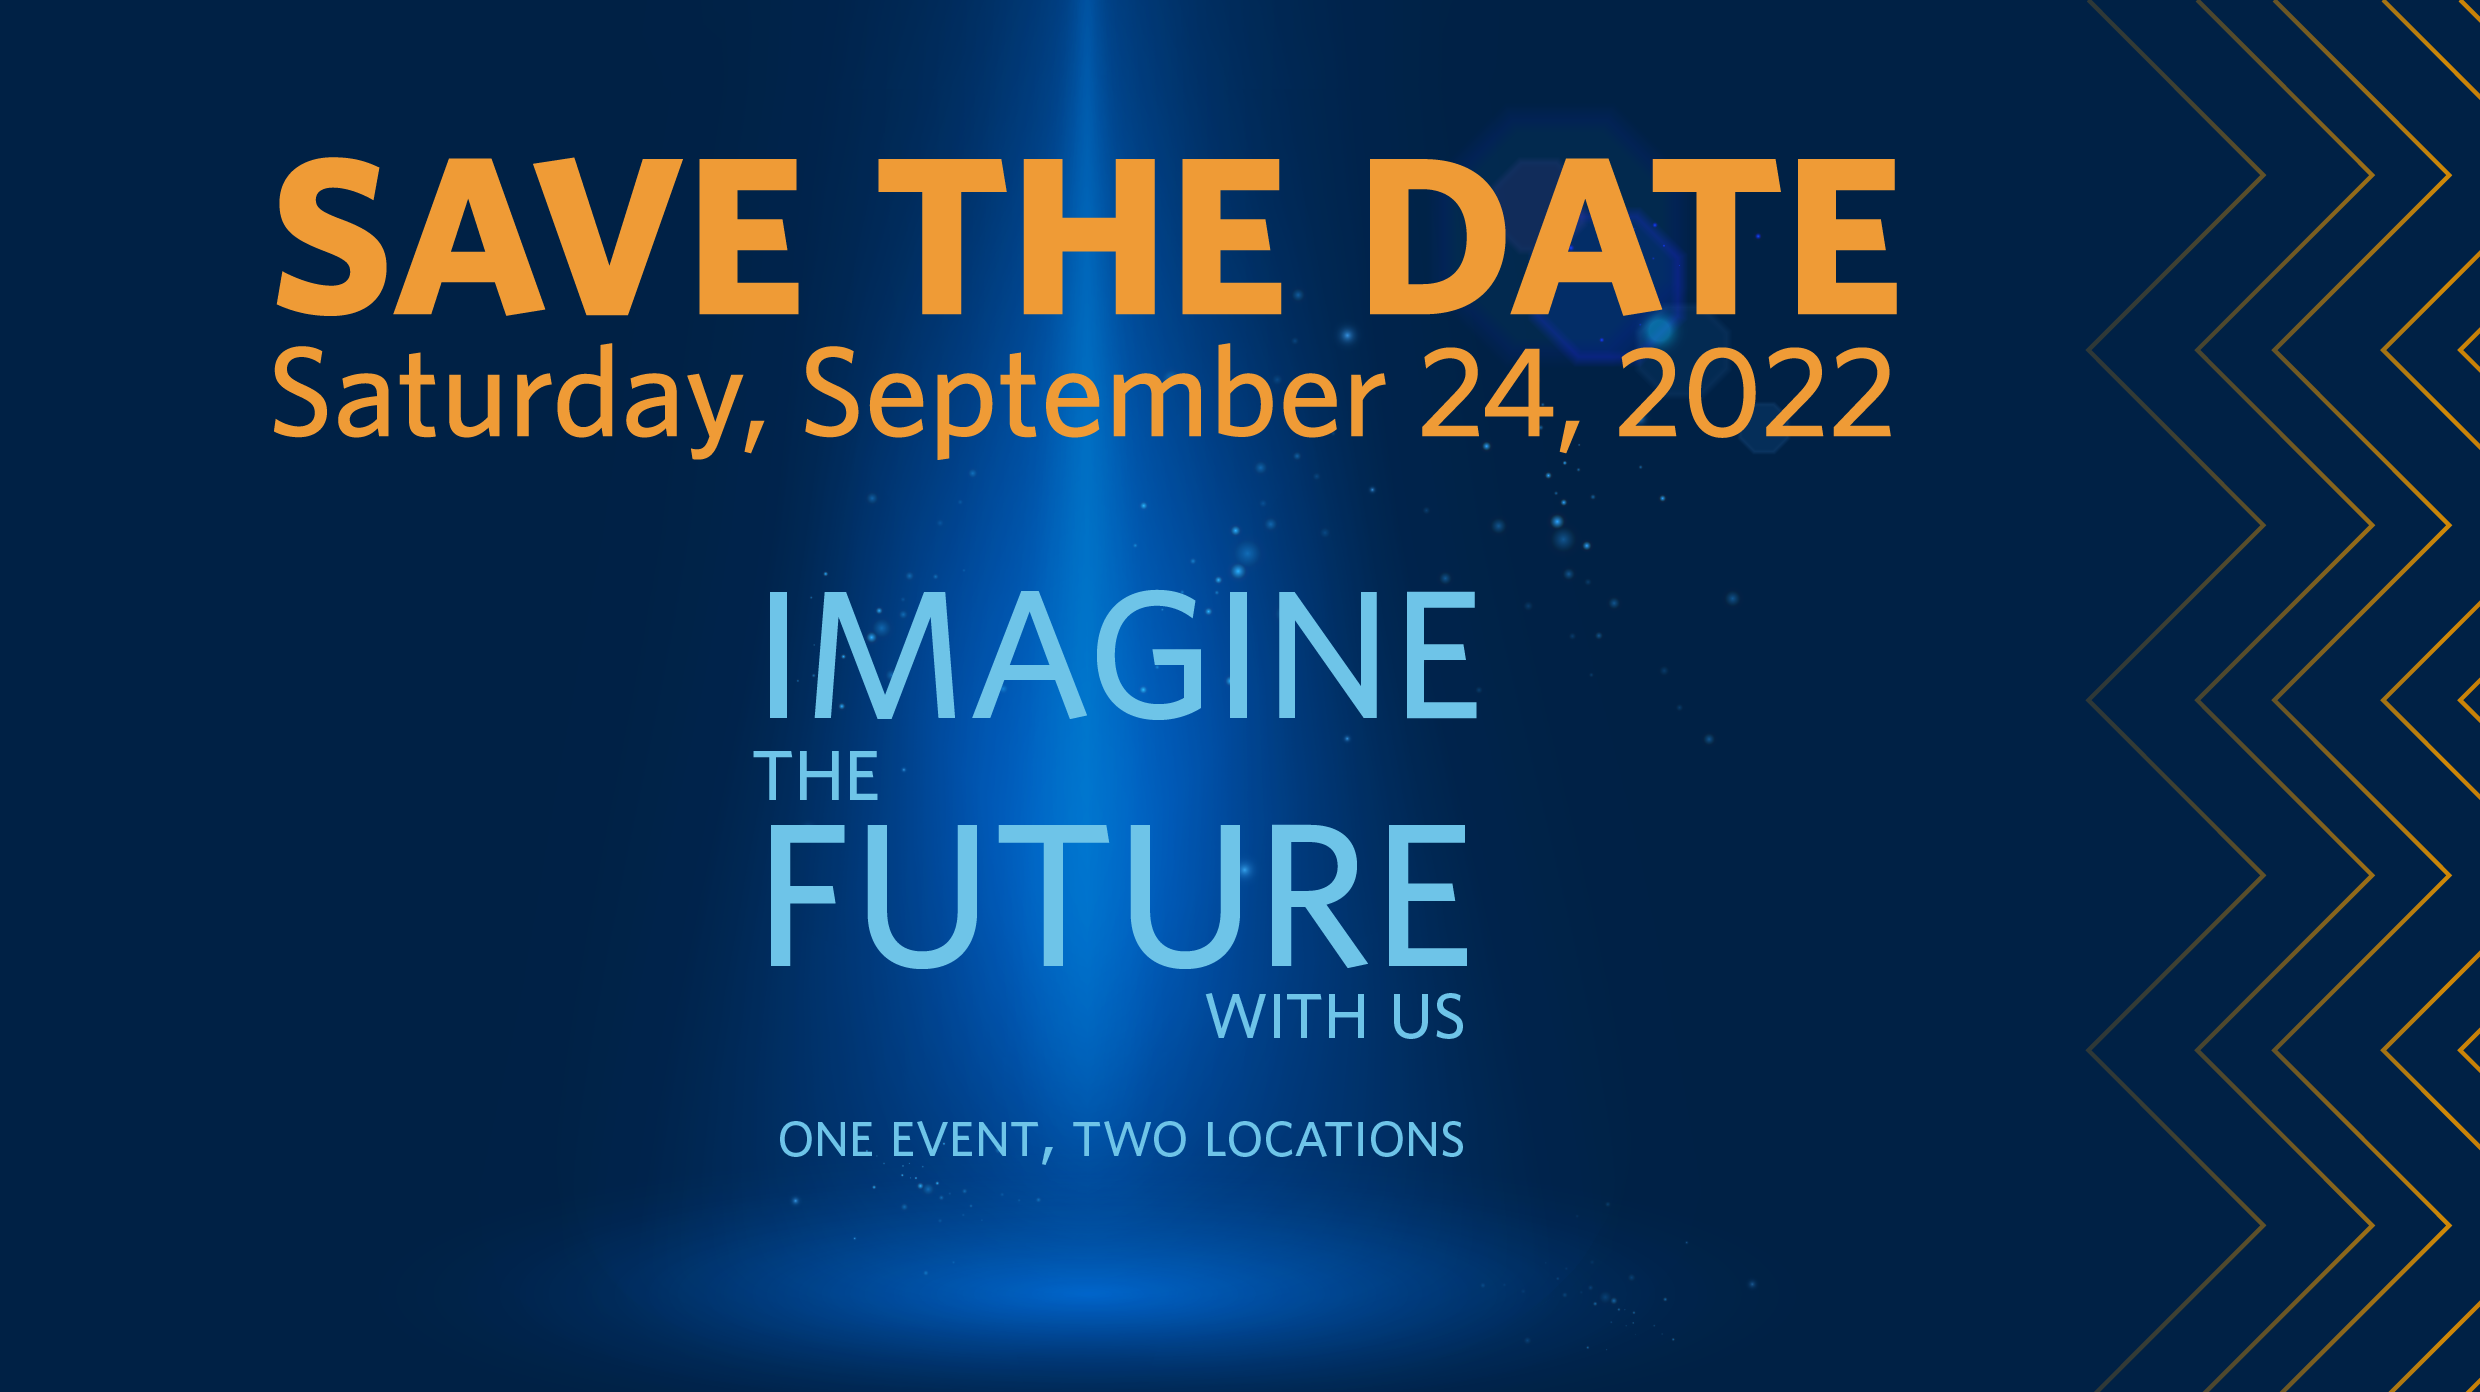 Save the date: September 24, 2022 | Imagine the future with us | One event, two locations